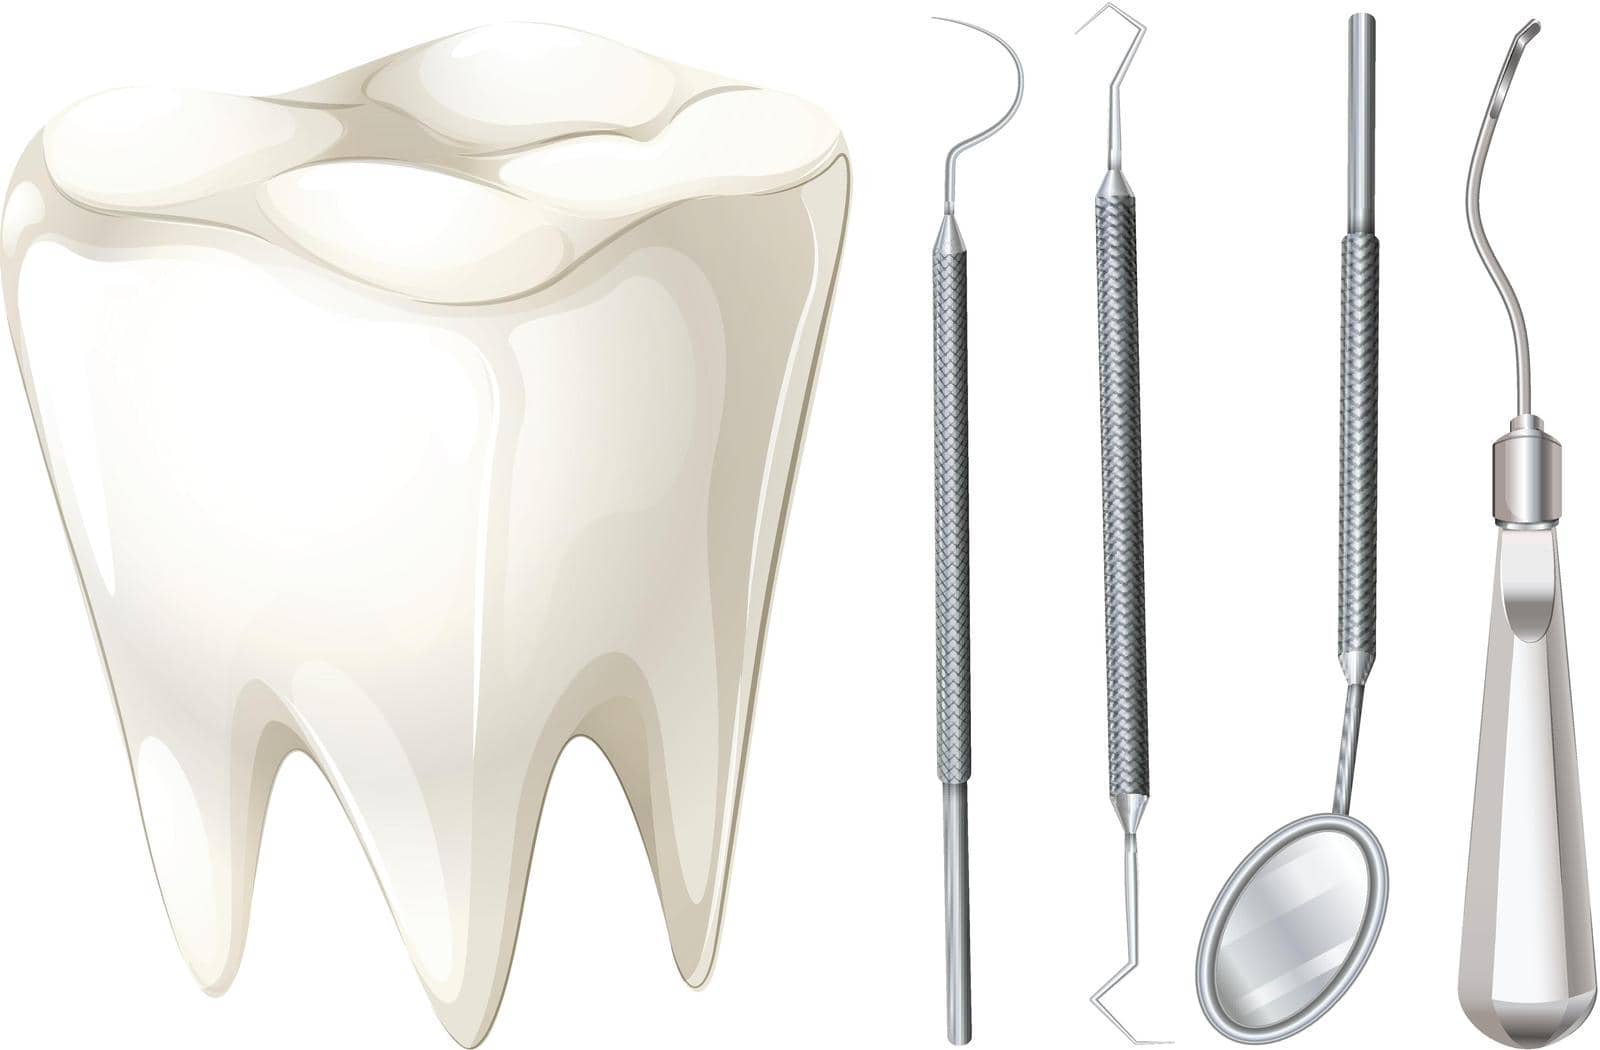 Dental set with tooth and equipment illustration